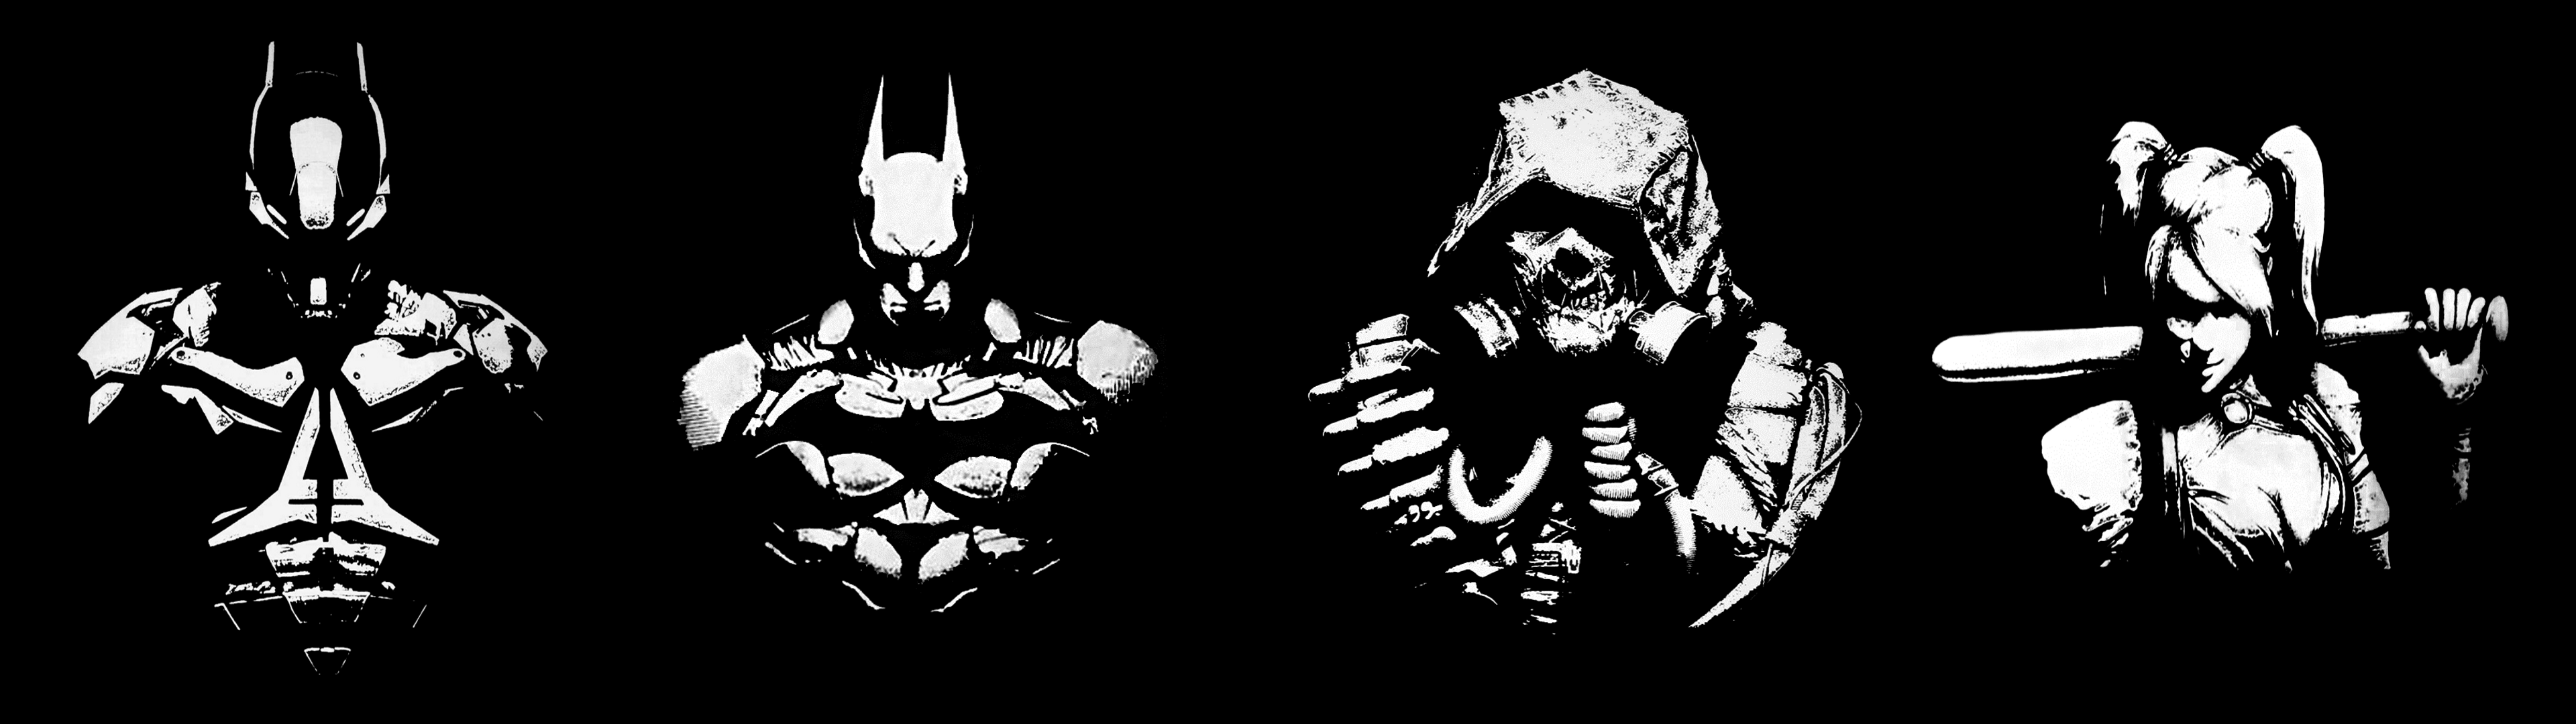 3840x1080 I edited four Batman Arkham wallpapers into one for